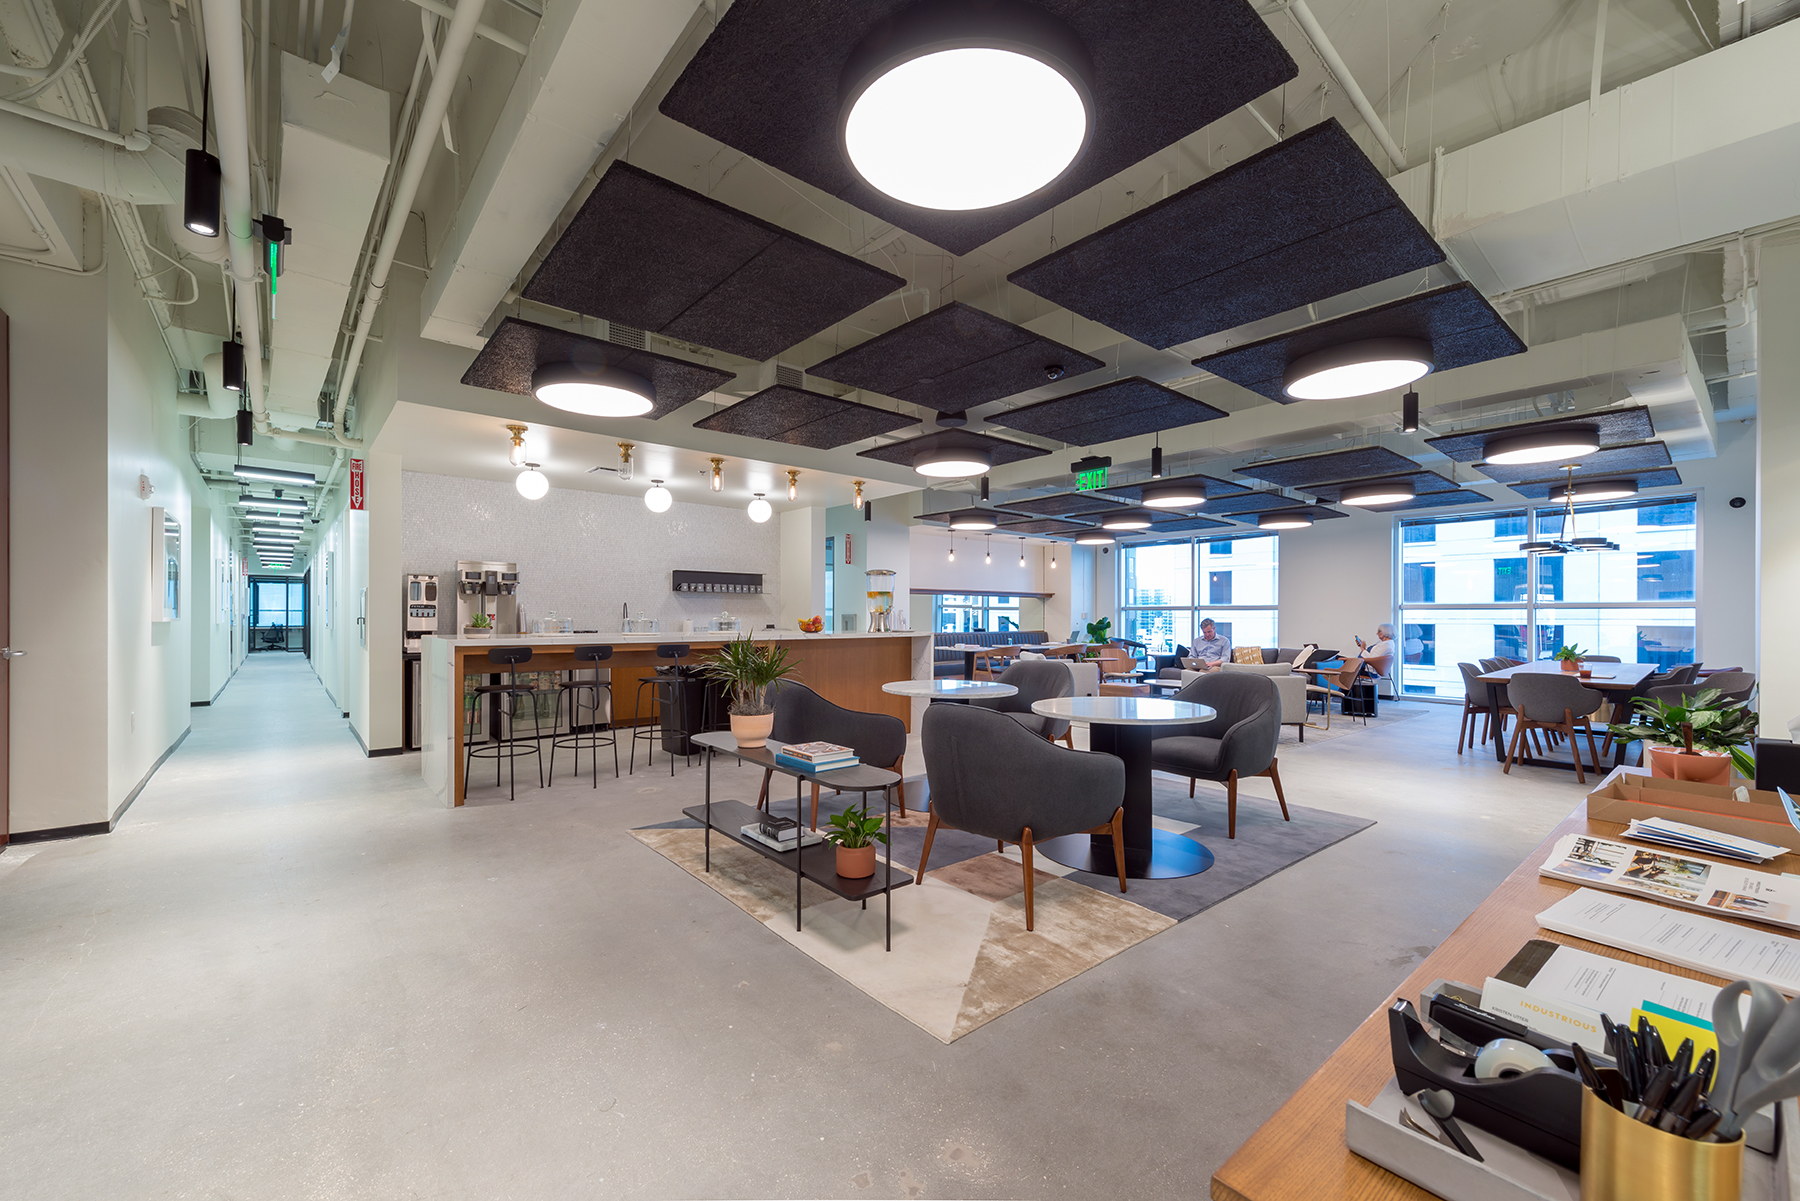 Three Office Design Tips for Increased Productivity